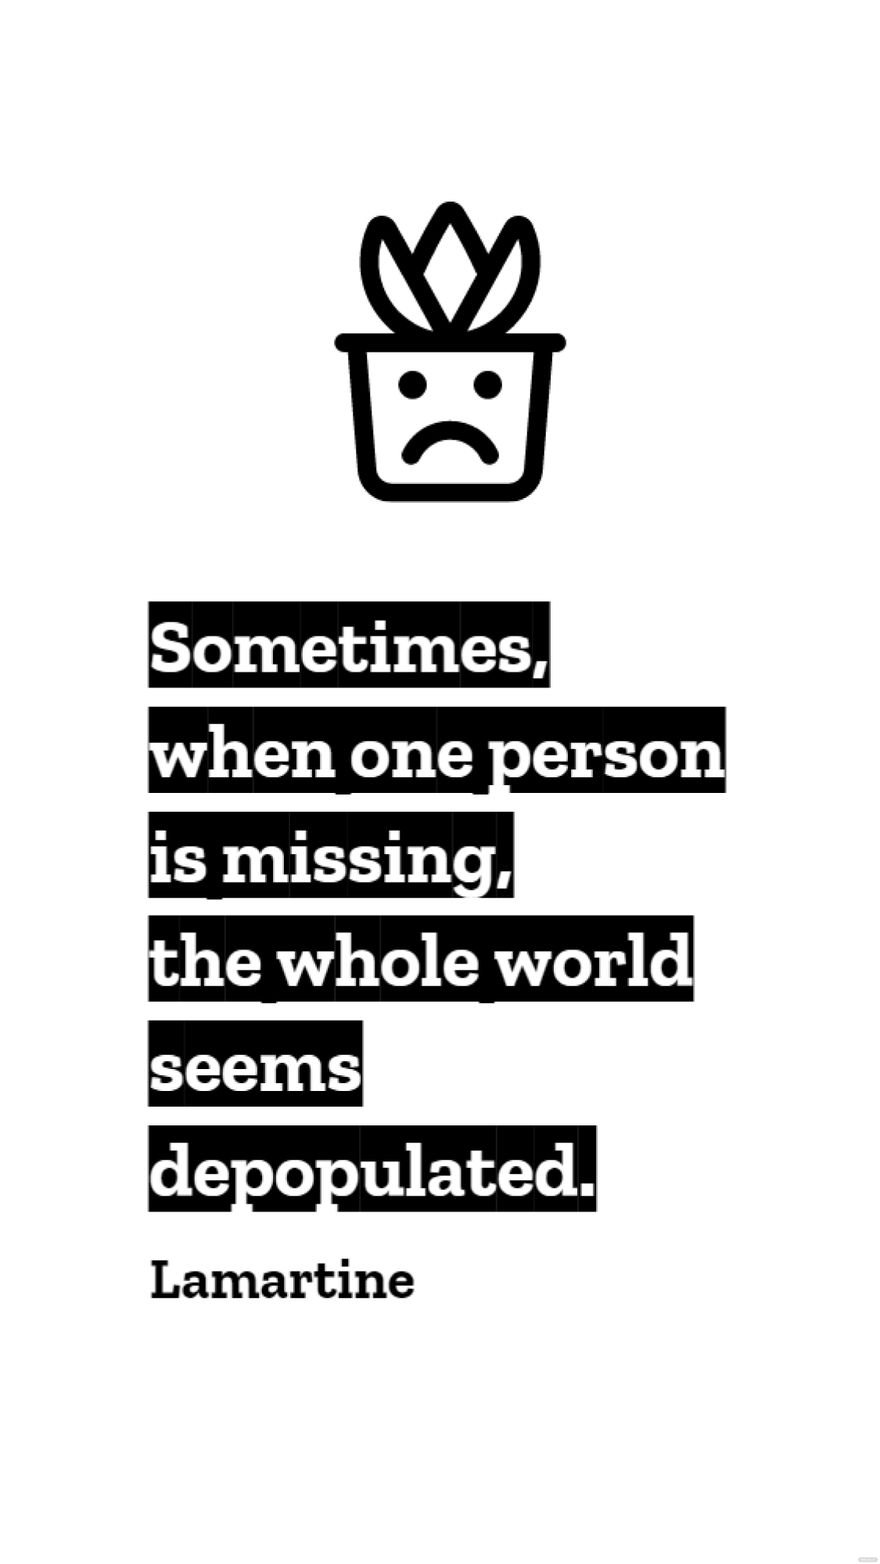 Lamartine - Sometimes, when one person is missing, the whole world seems depopulated. in JPG